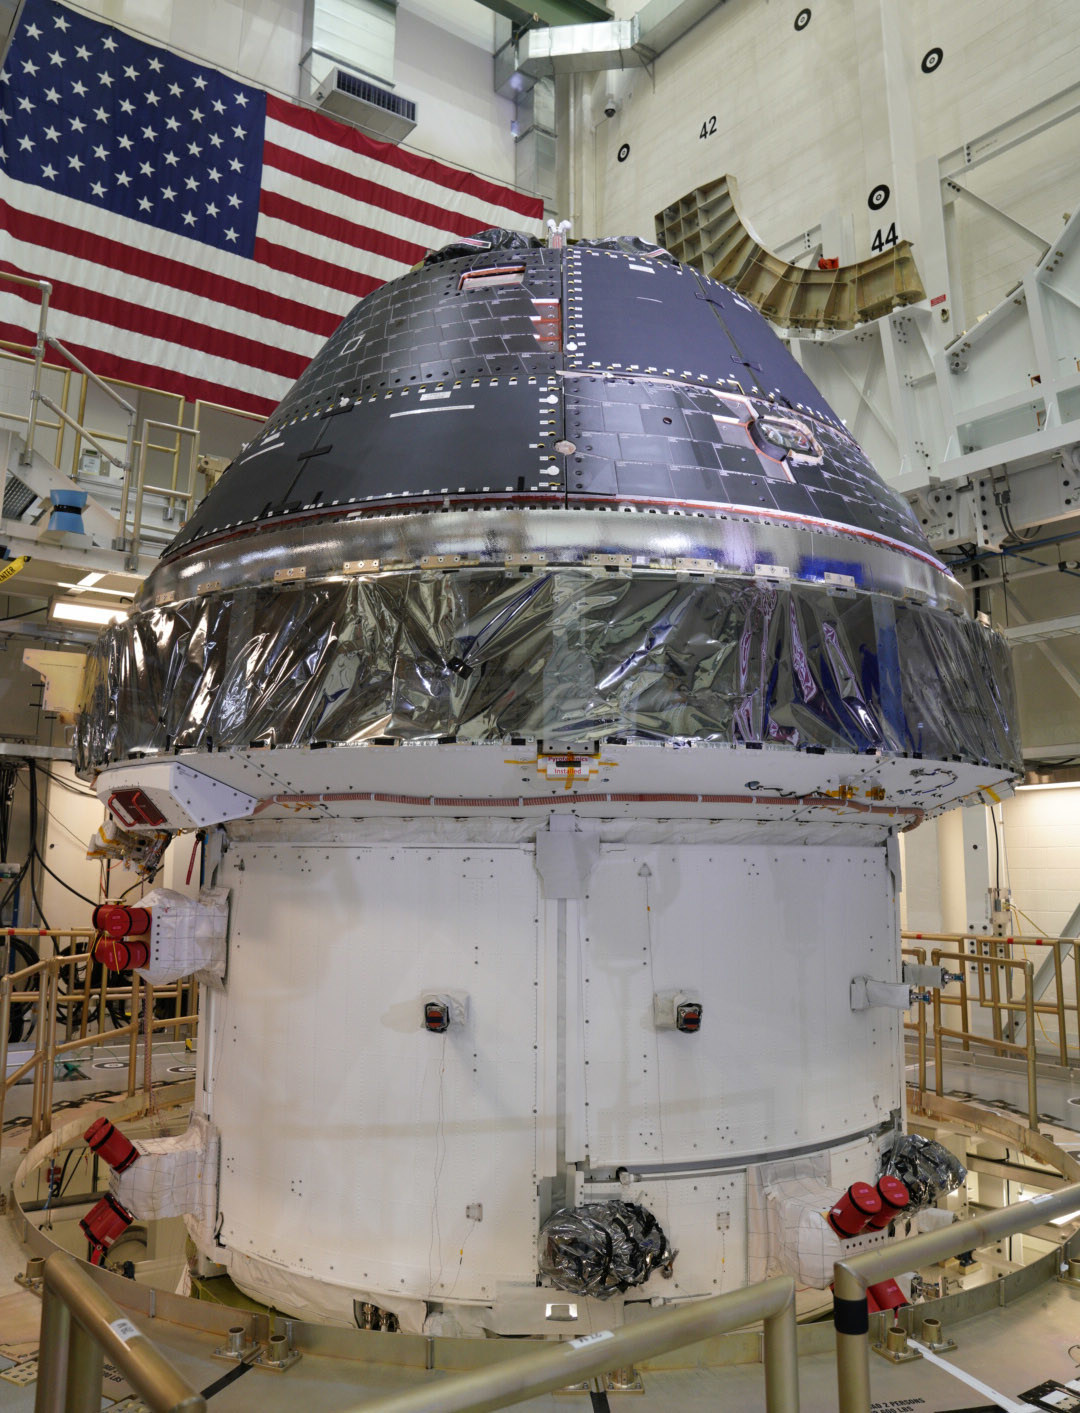 On the anniversary of the Apollo Moon landing, the Lockheed Martin built Orion capsule for the Artemis 1 mission to the Moon was declared finished.